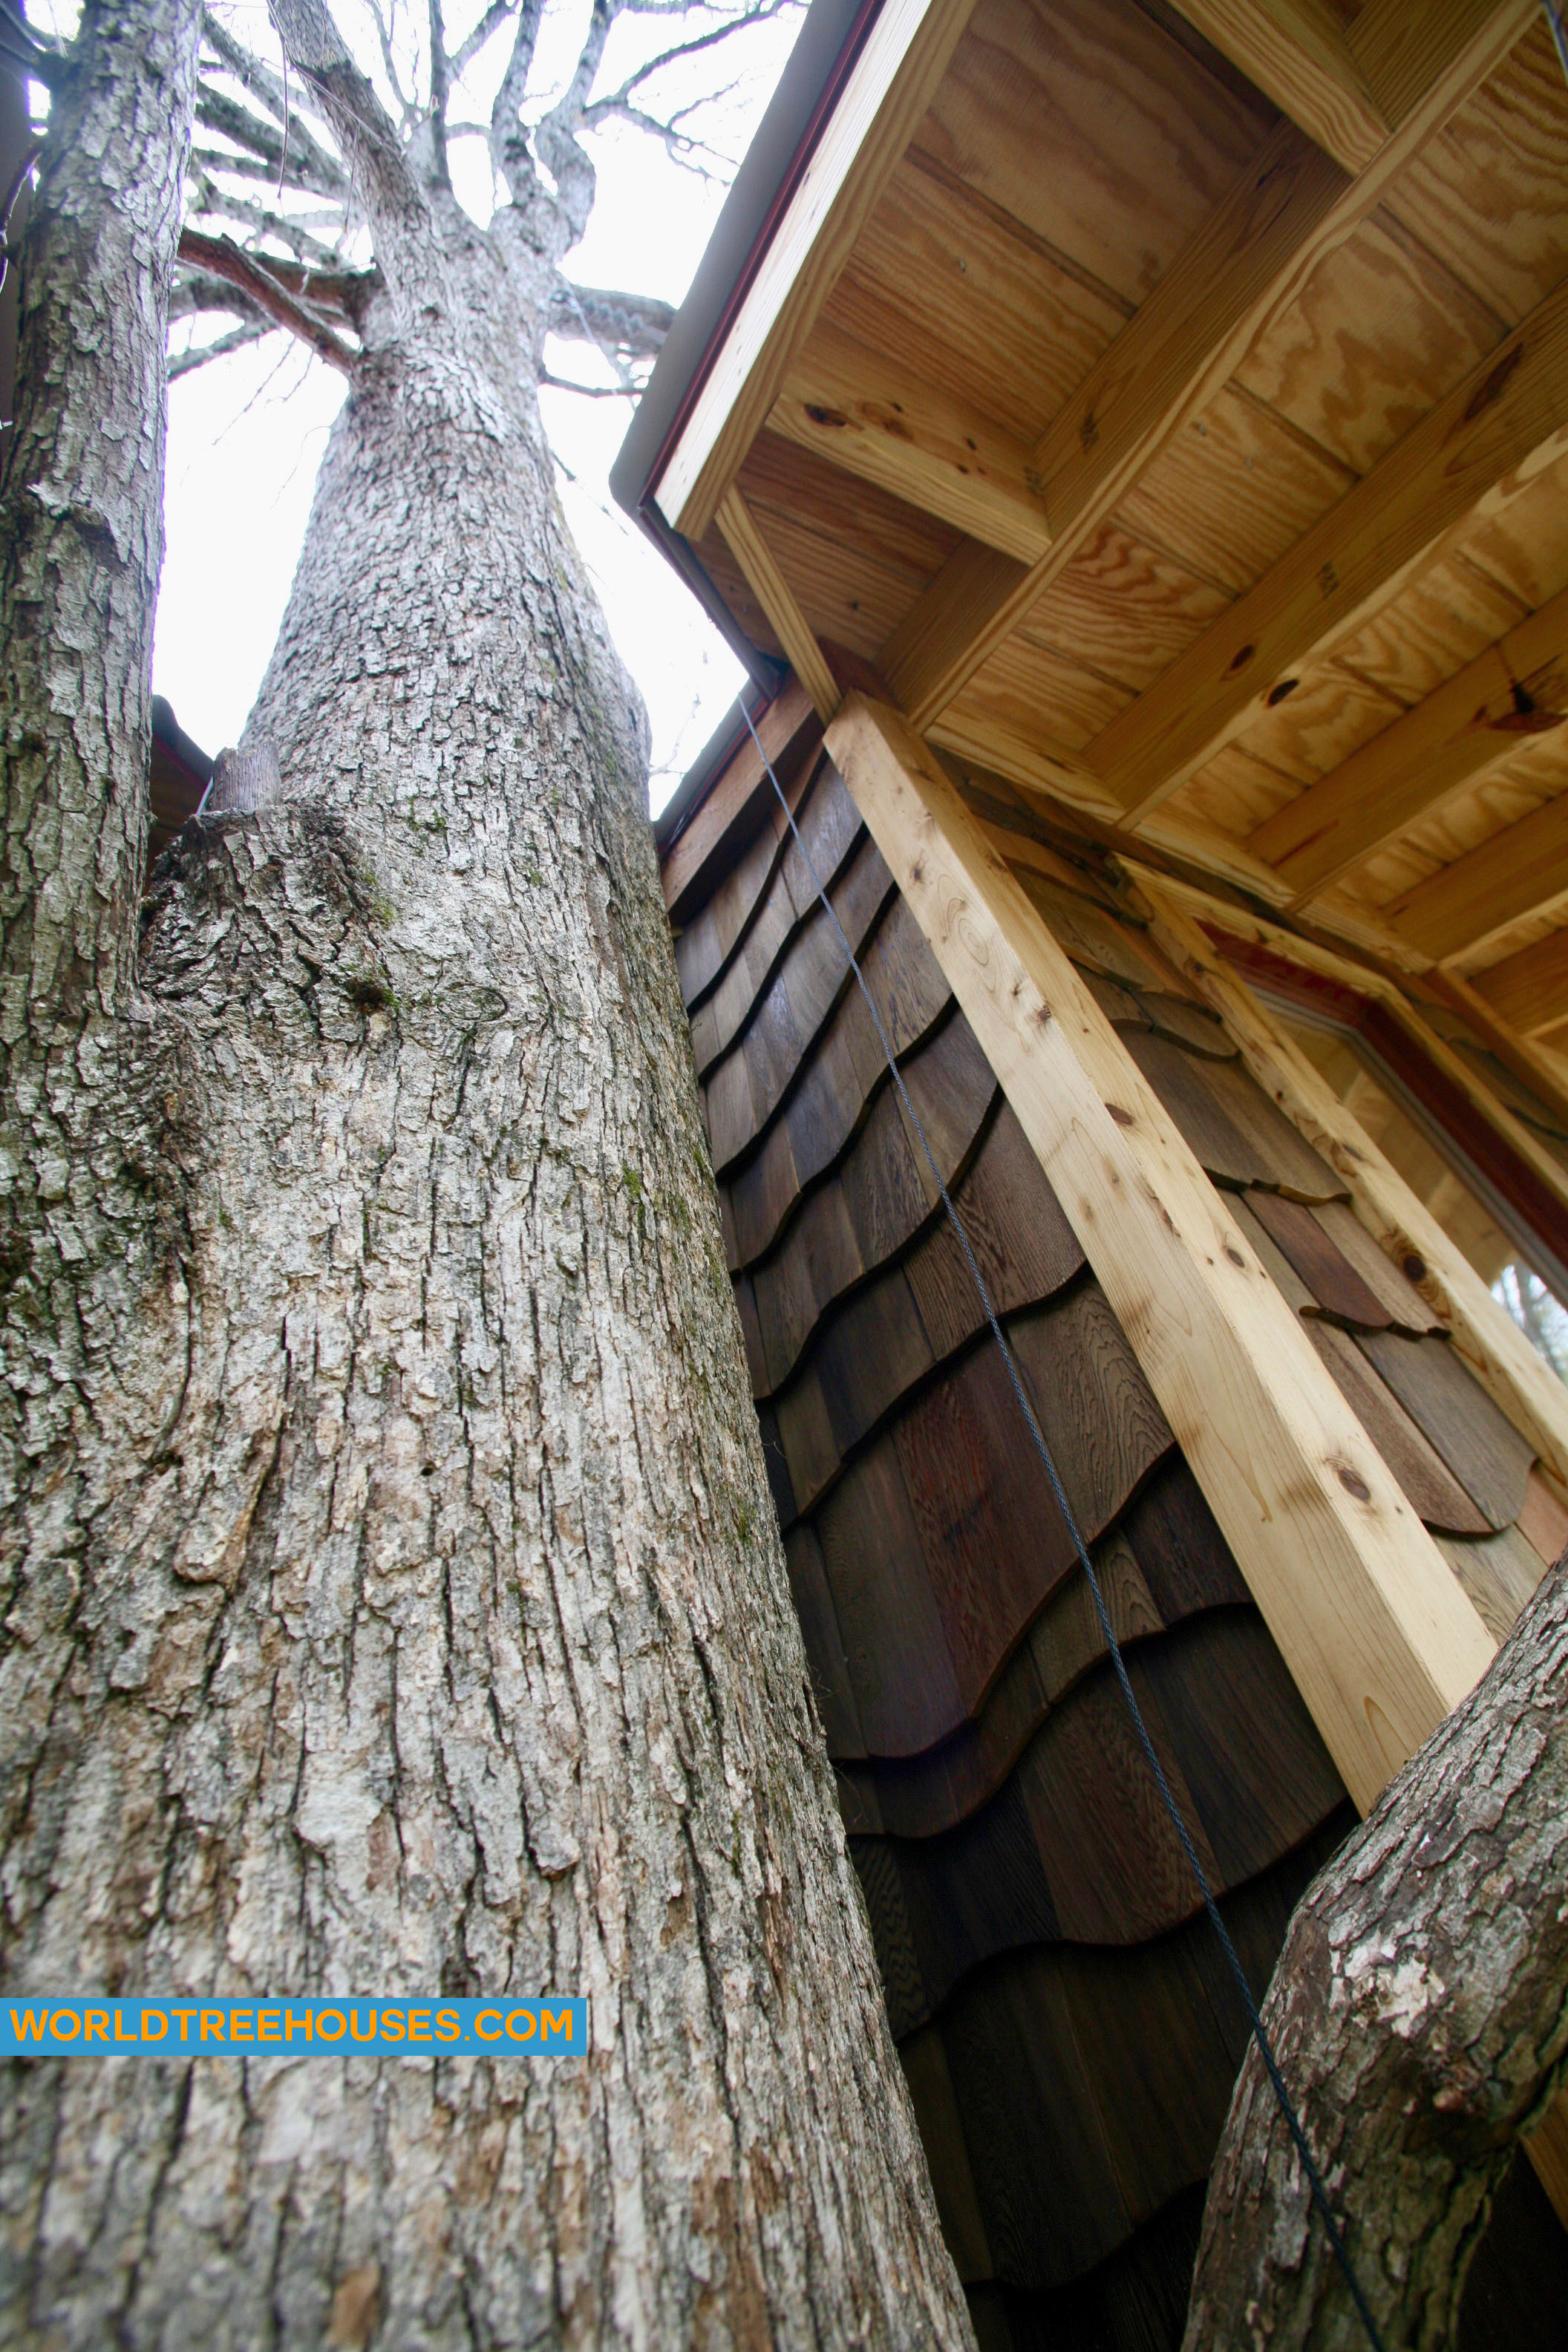 NC treehouse builders: Building with the grace and beauty of the trees